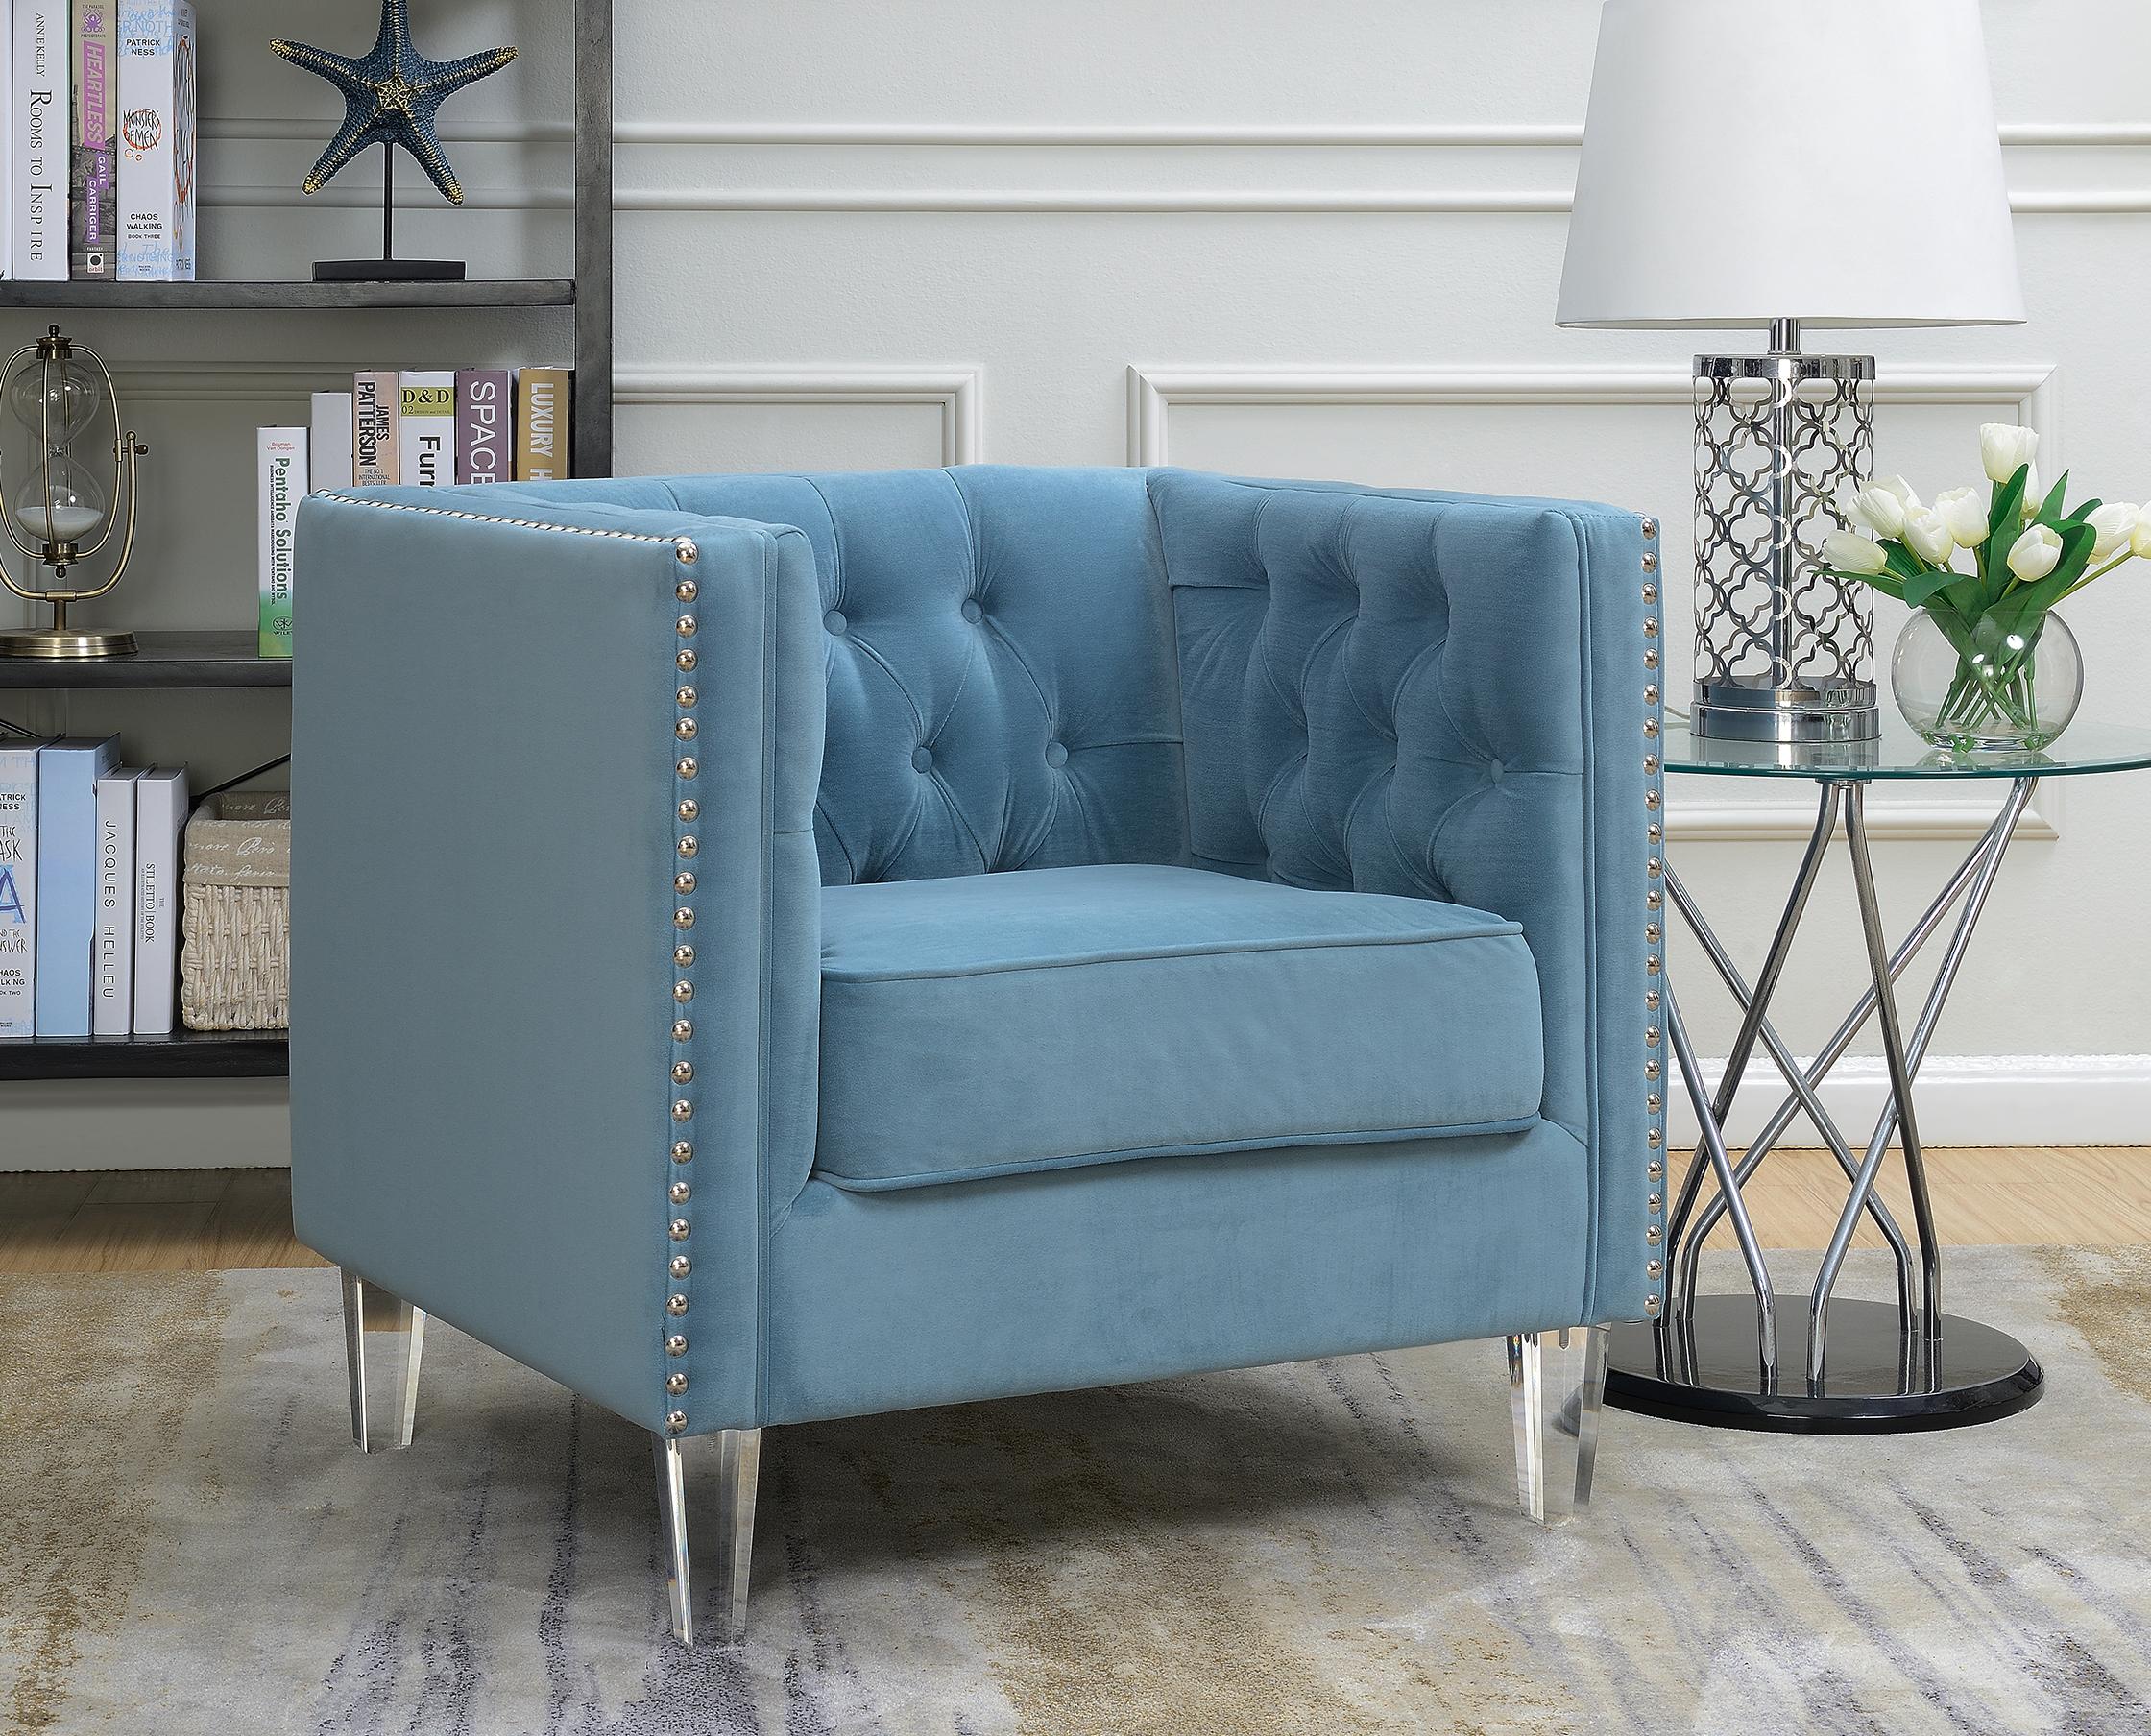 Contemporary Aarmchair Ariel ARIEL-TEAL-C in Teal Polyester